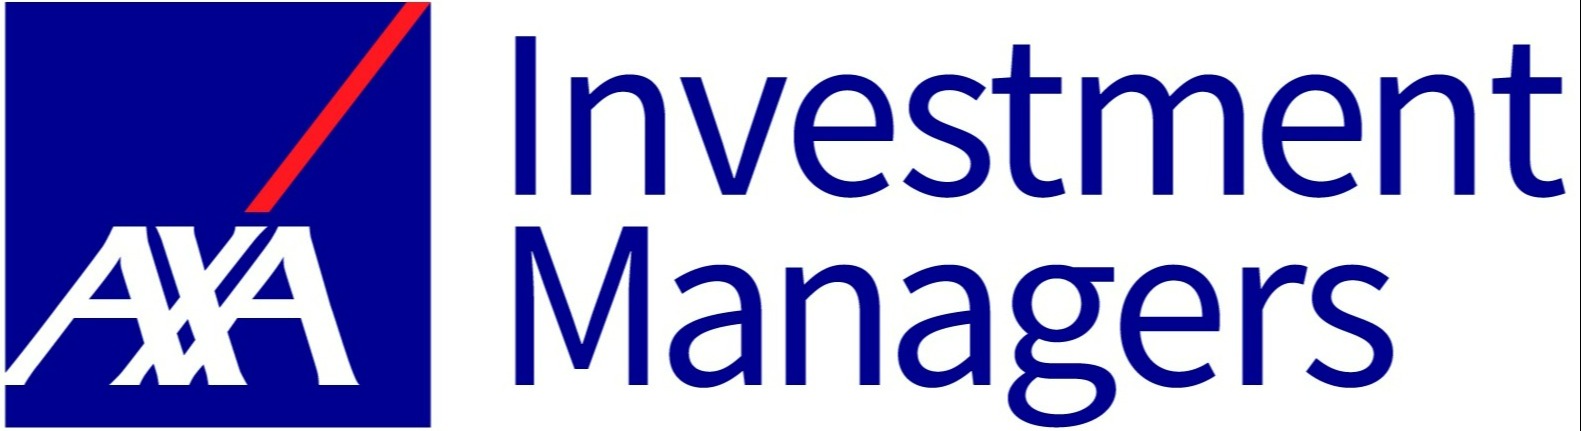 Display Image of AXA Investment Managers